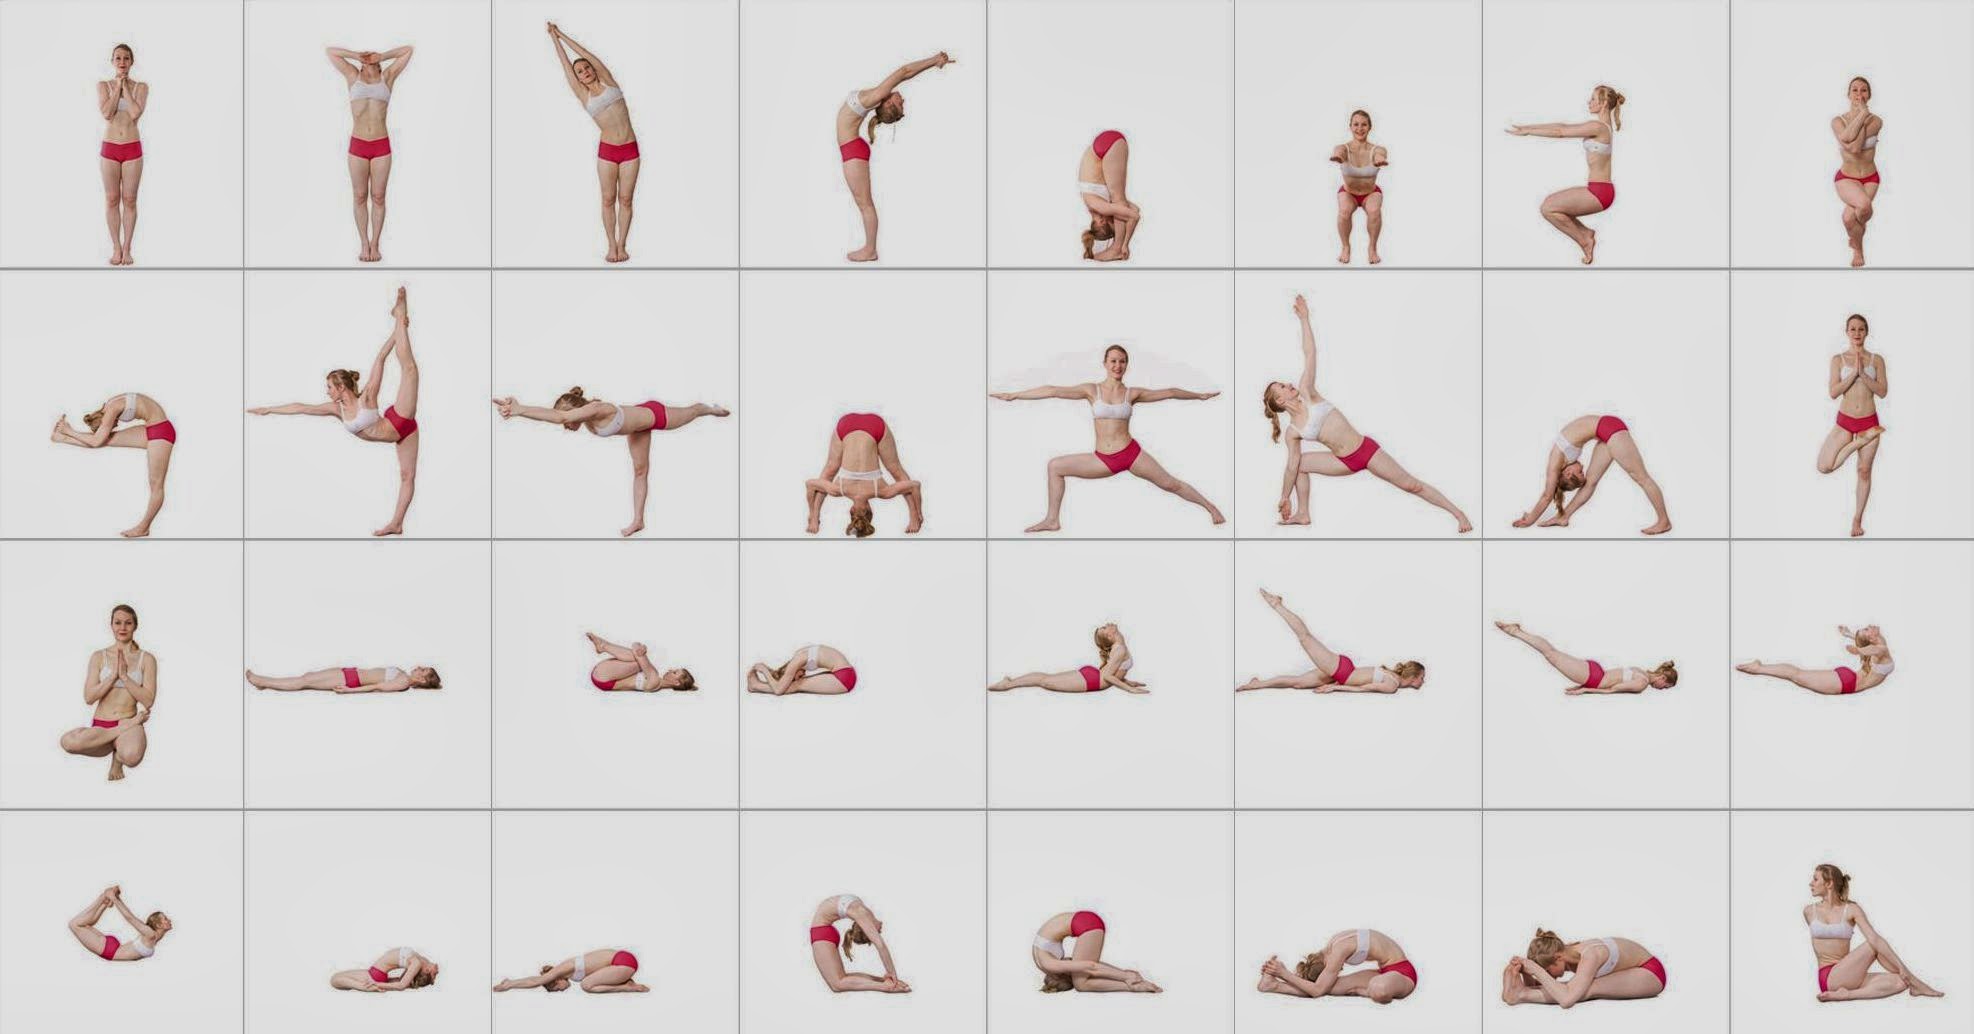 Any health effects from practicing Bikram yoga? 1